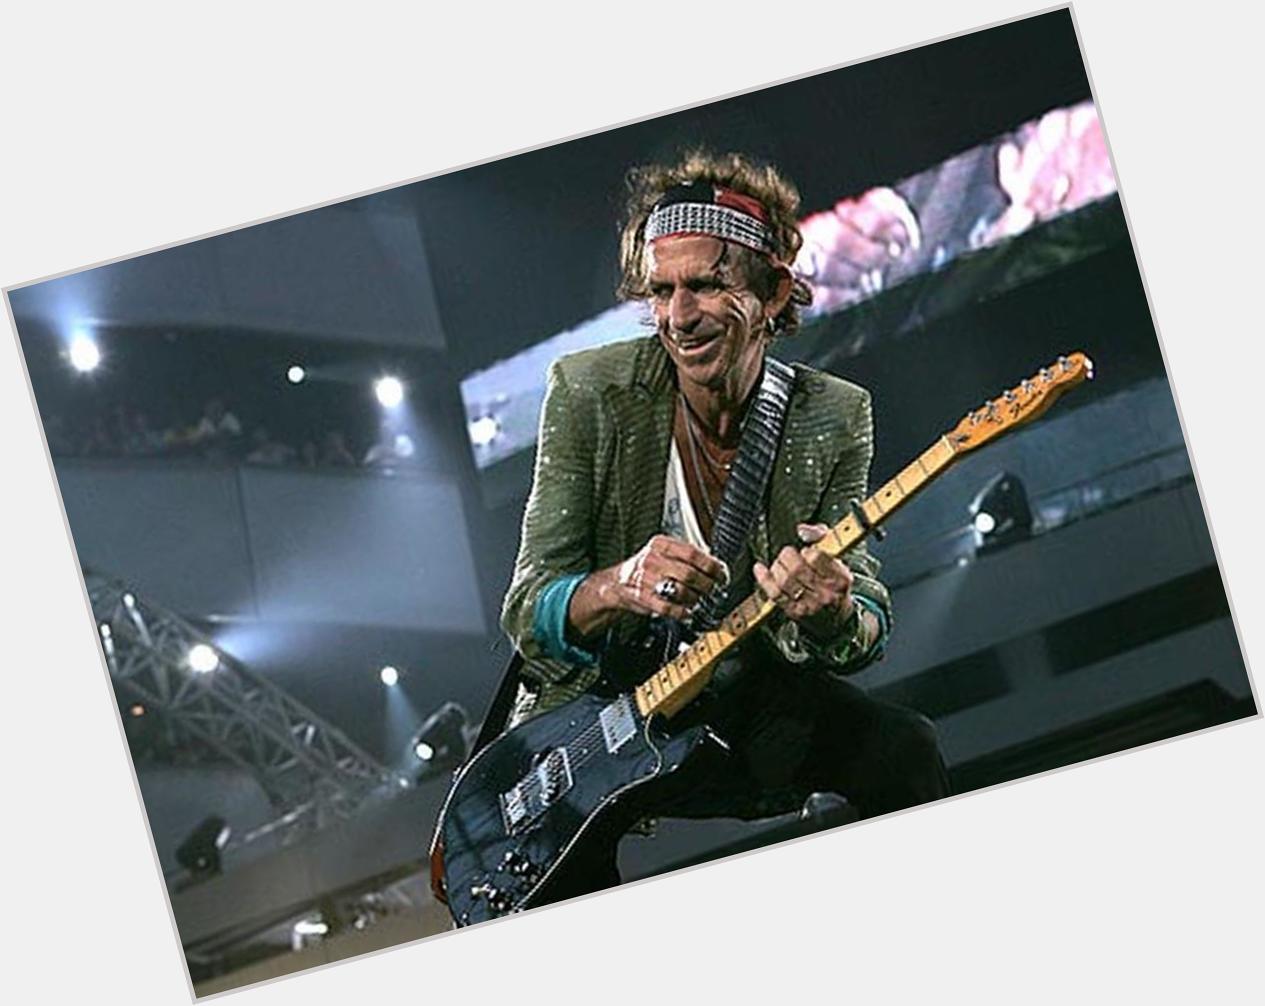 Happy birthday to one of my absolute favorite people of all time and a huge inspiration to me, Keith Richards!! 